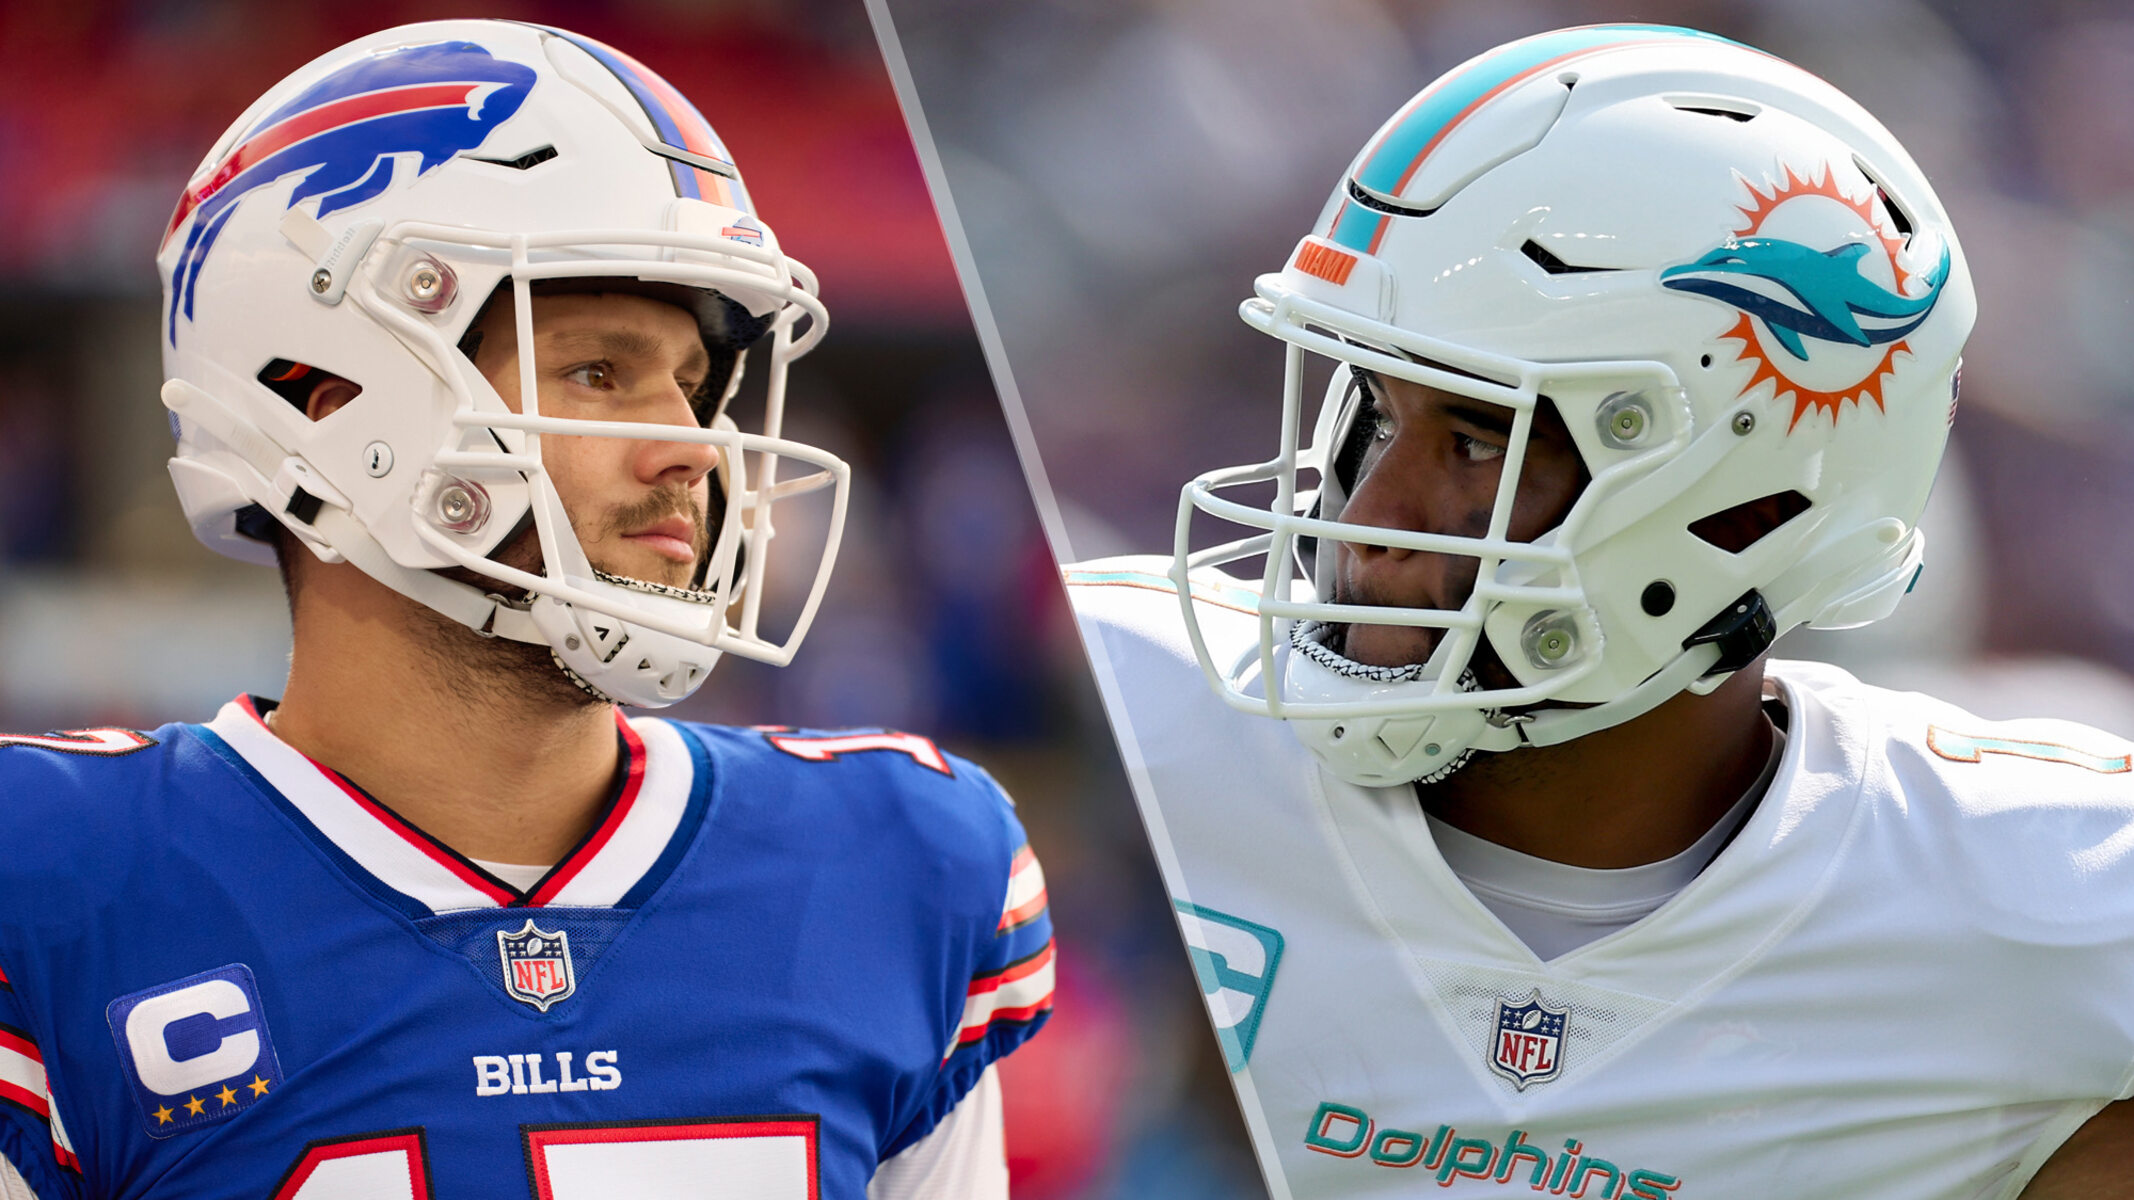 How To Watch Bills Vs Dolphins